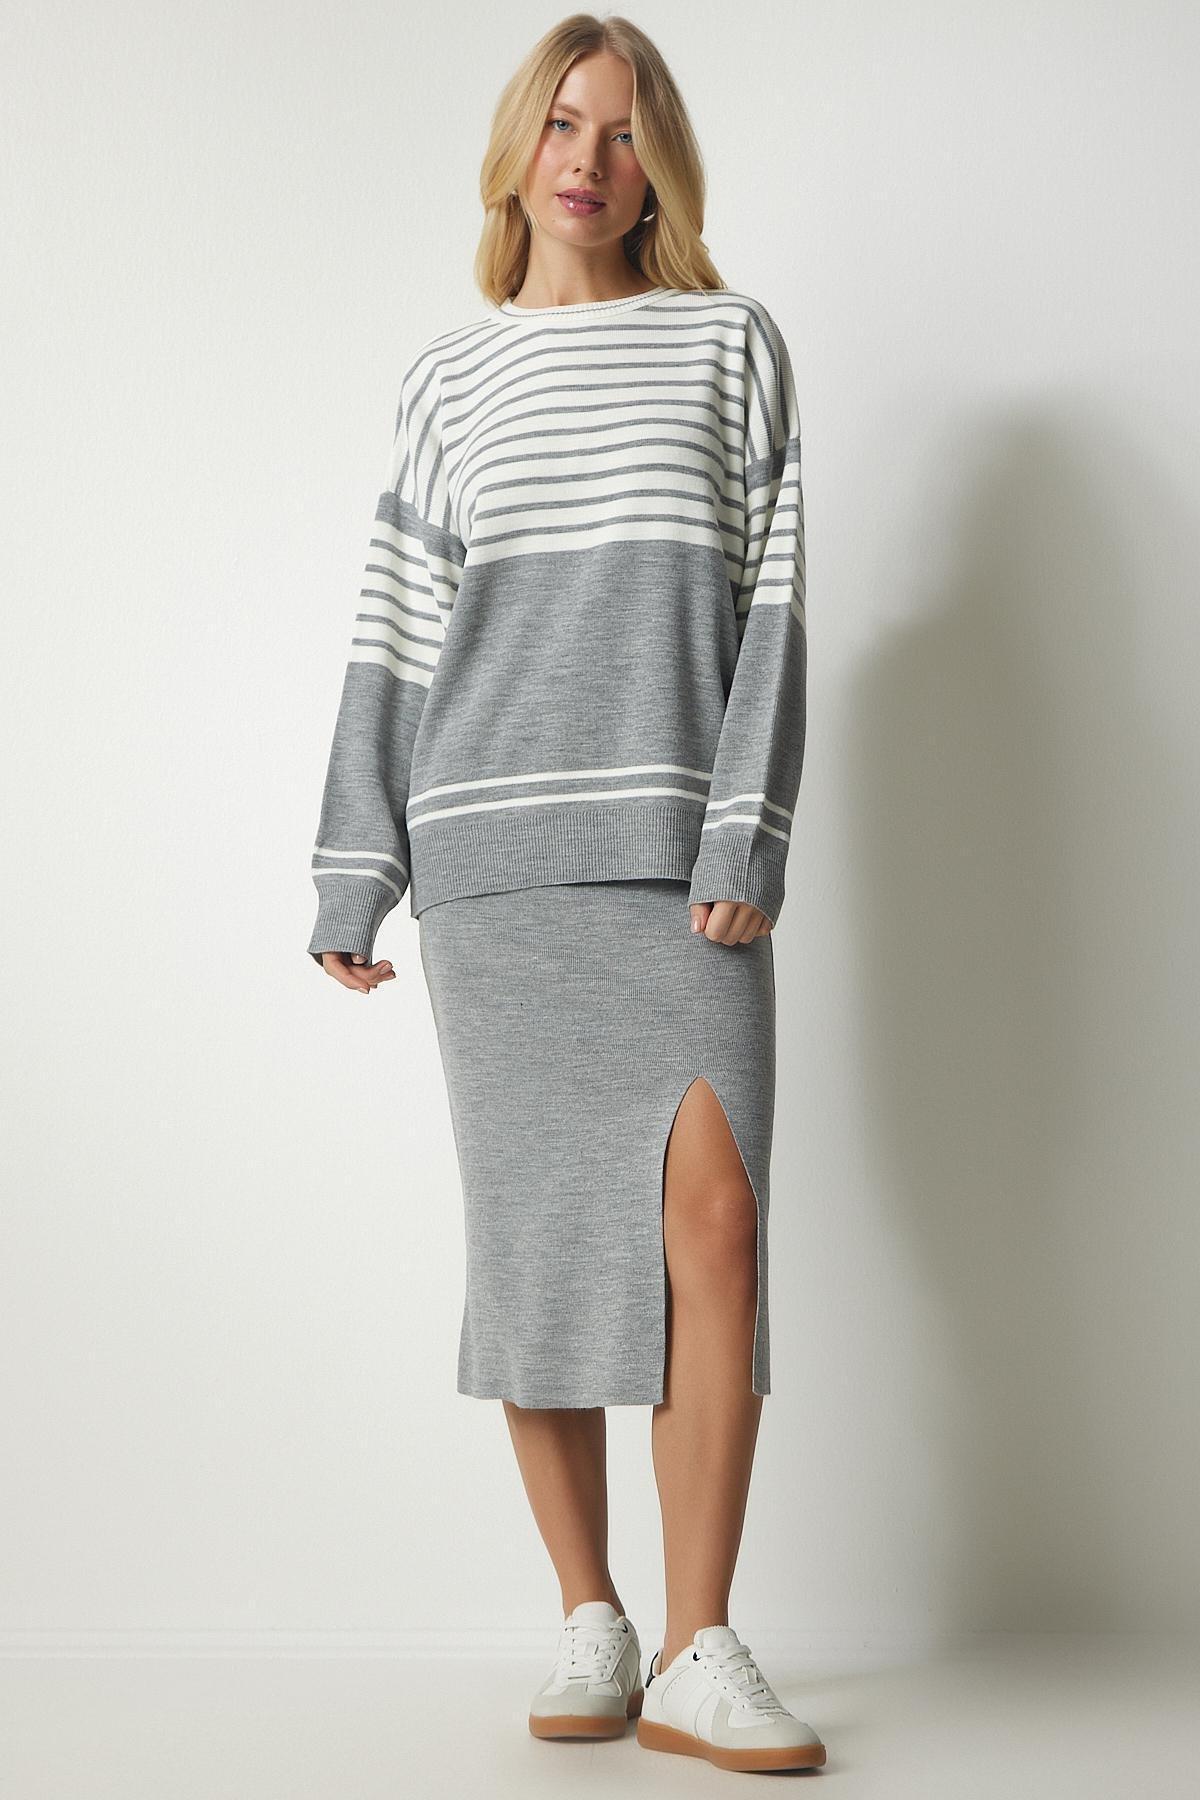 Happiness Istanbul - Grey Striped Sweater Skirt Knitwear Co-Ord Set